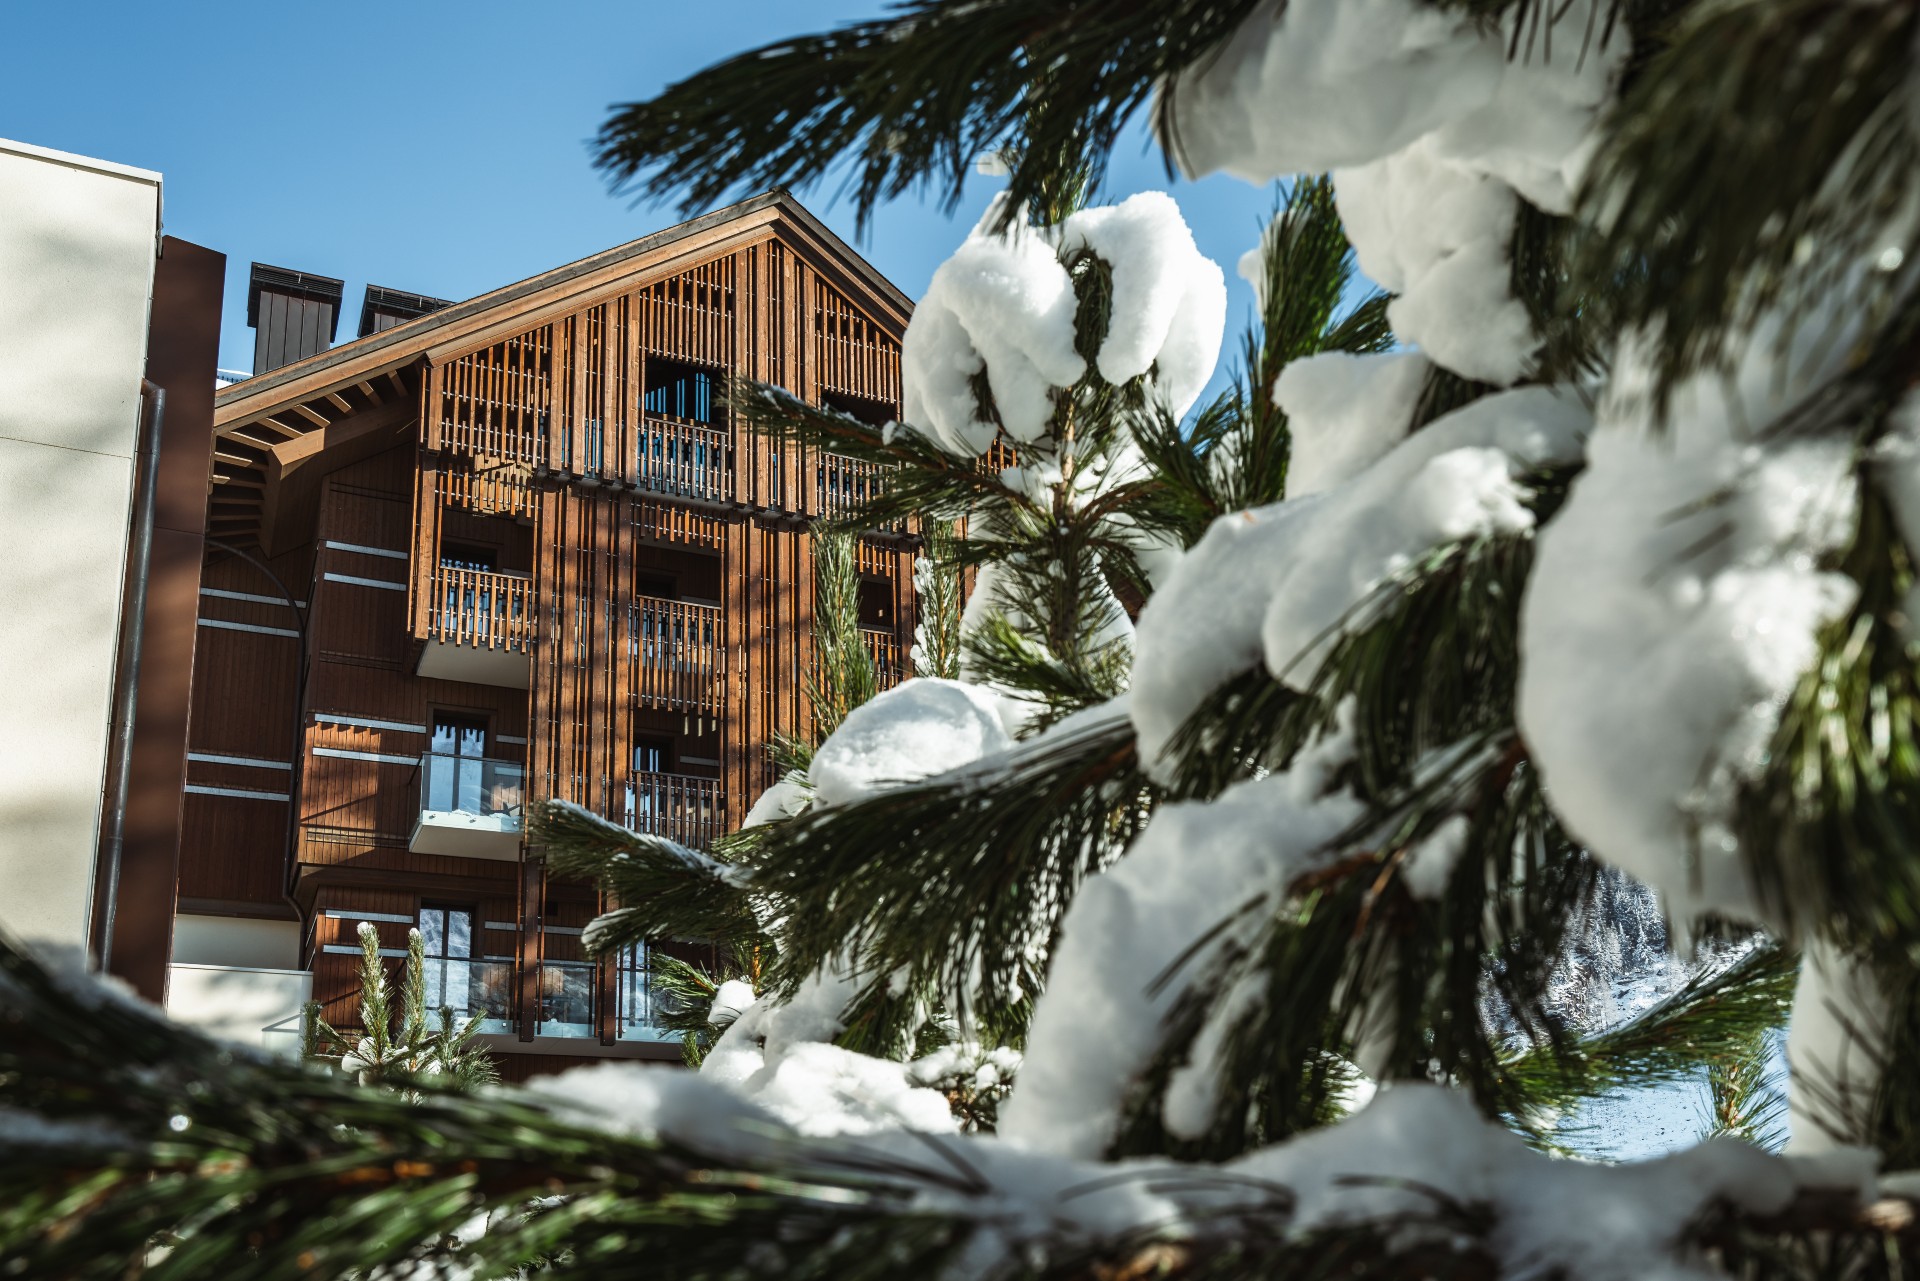 The Chedi Andermatt main house photographed from the outside through a branch of a fir tree.